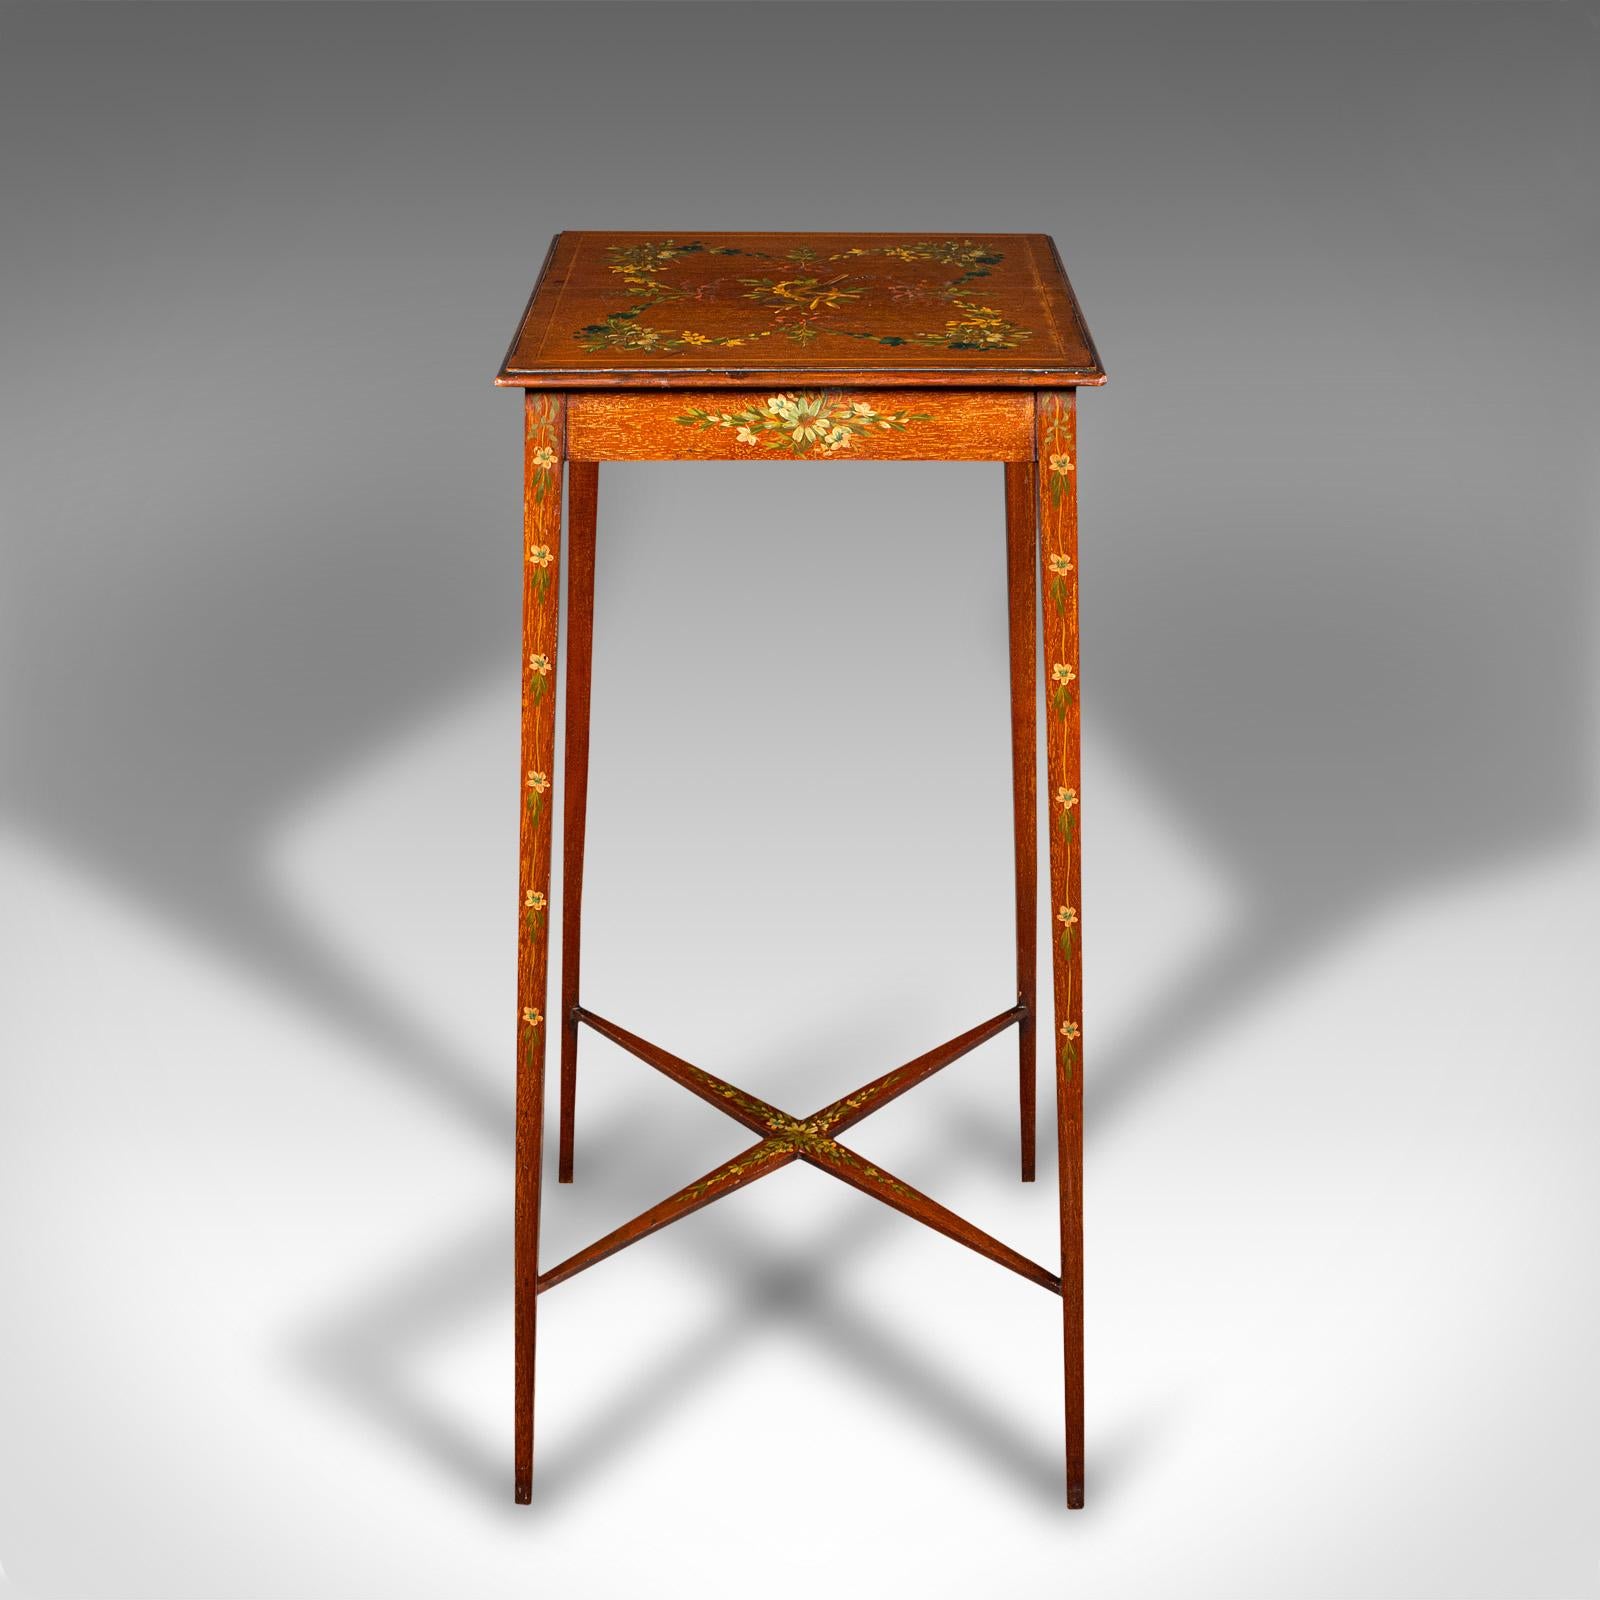 19th Century Small Antique Lamp Table, English, Occasional, Hand Painted Decor, Regency, 1820 For Sale